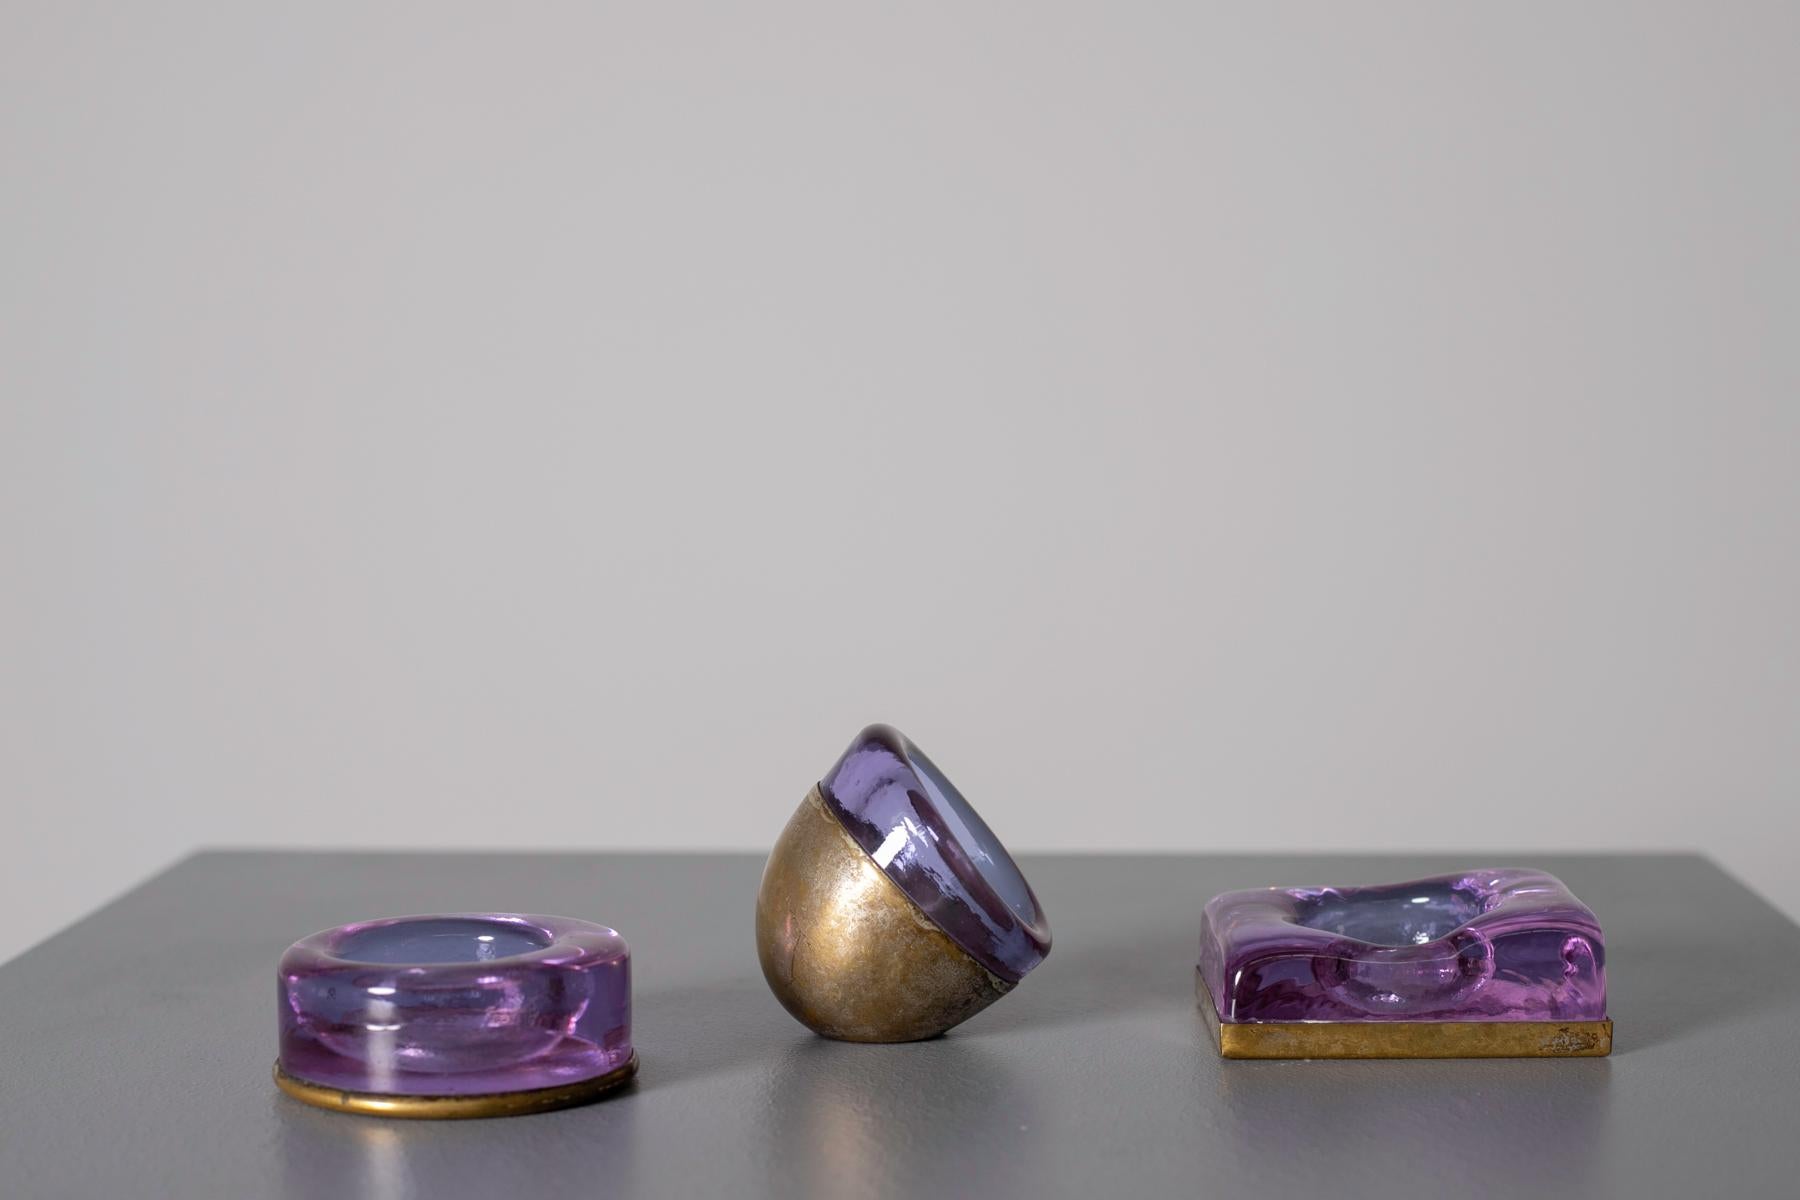 Elegant and sophisticated Italian candle holder set from the 1950s. The set consists of three pieces. Each piece contains a single candle. The candleholder consists of a brass base and is covered with a purple amethyst stone. The purple stone makes